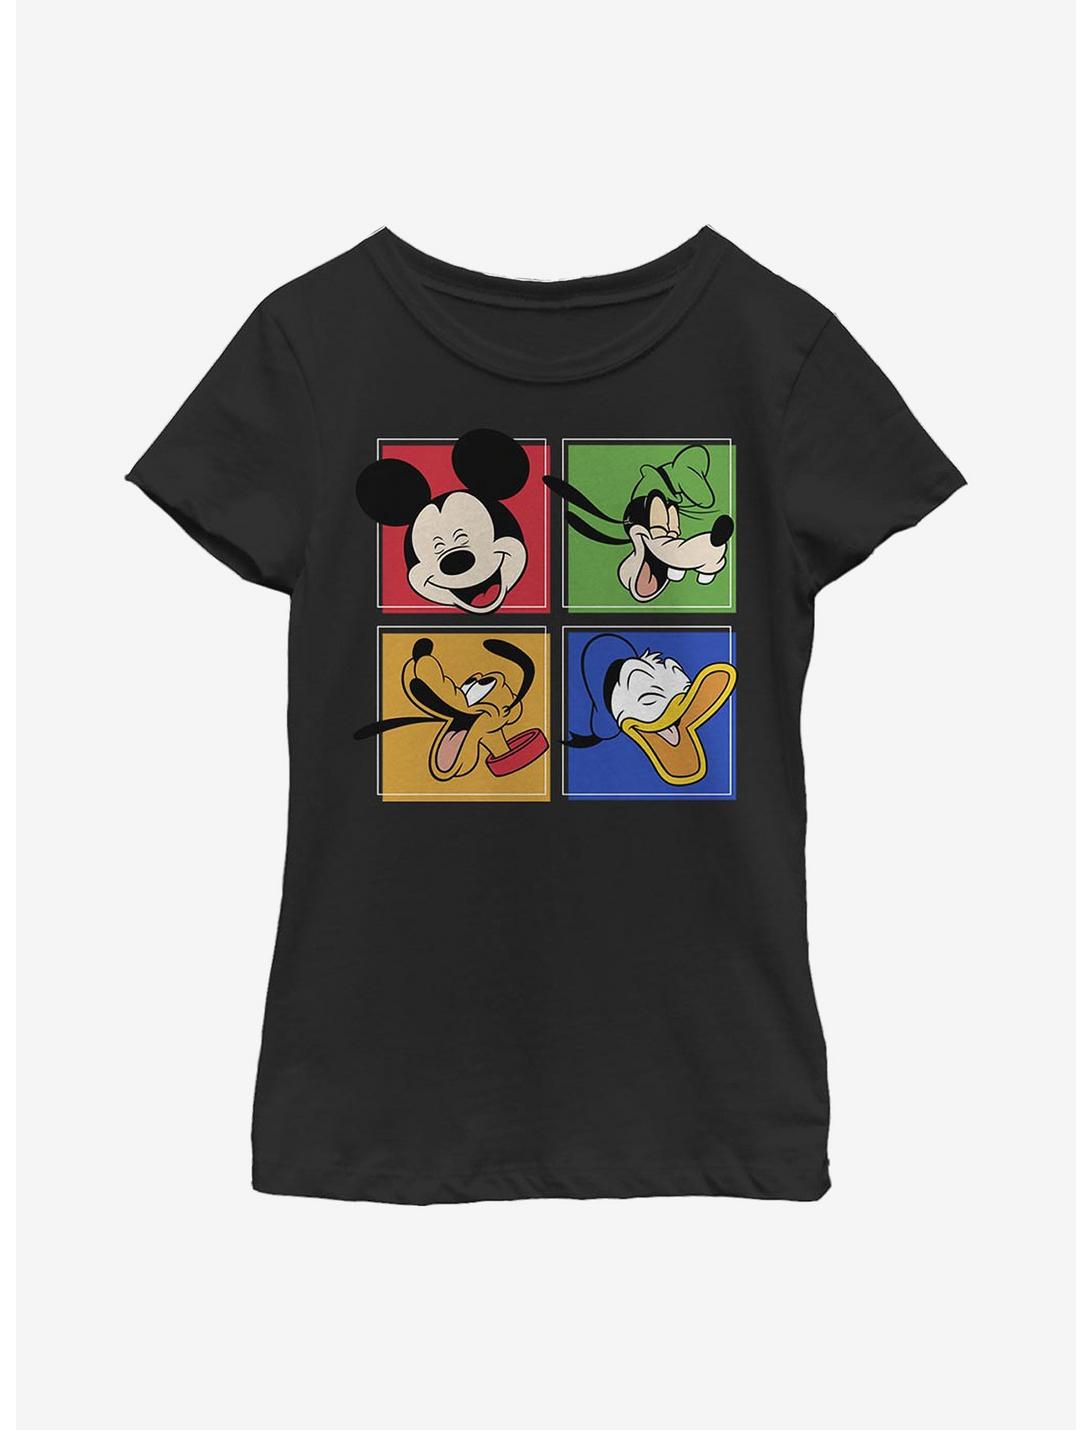 Disney Mickey Mouse And Friends Youth Girls T-Shirt, BLACK, hi-res